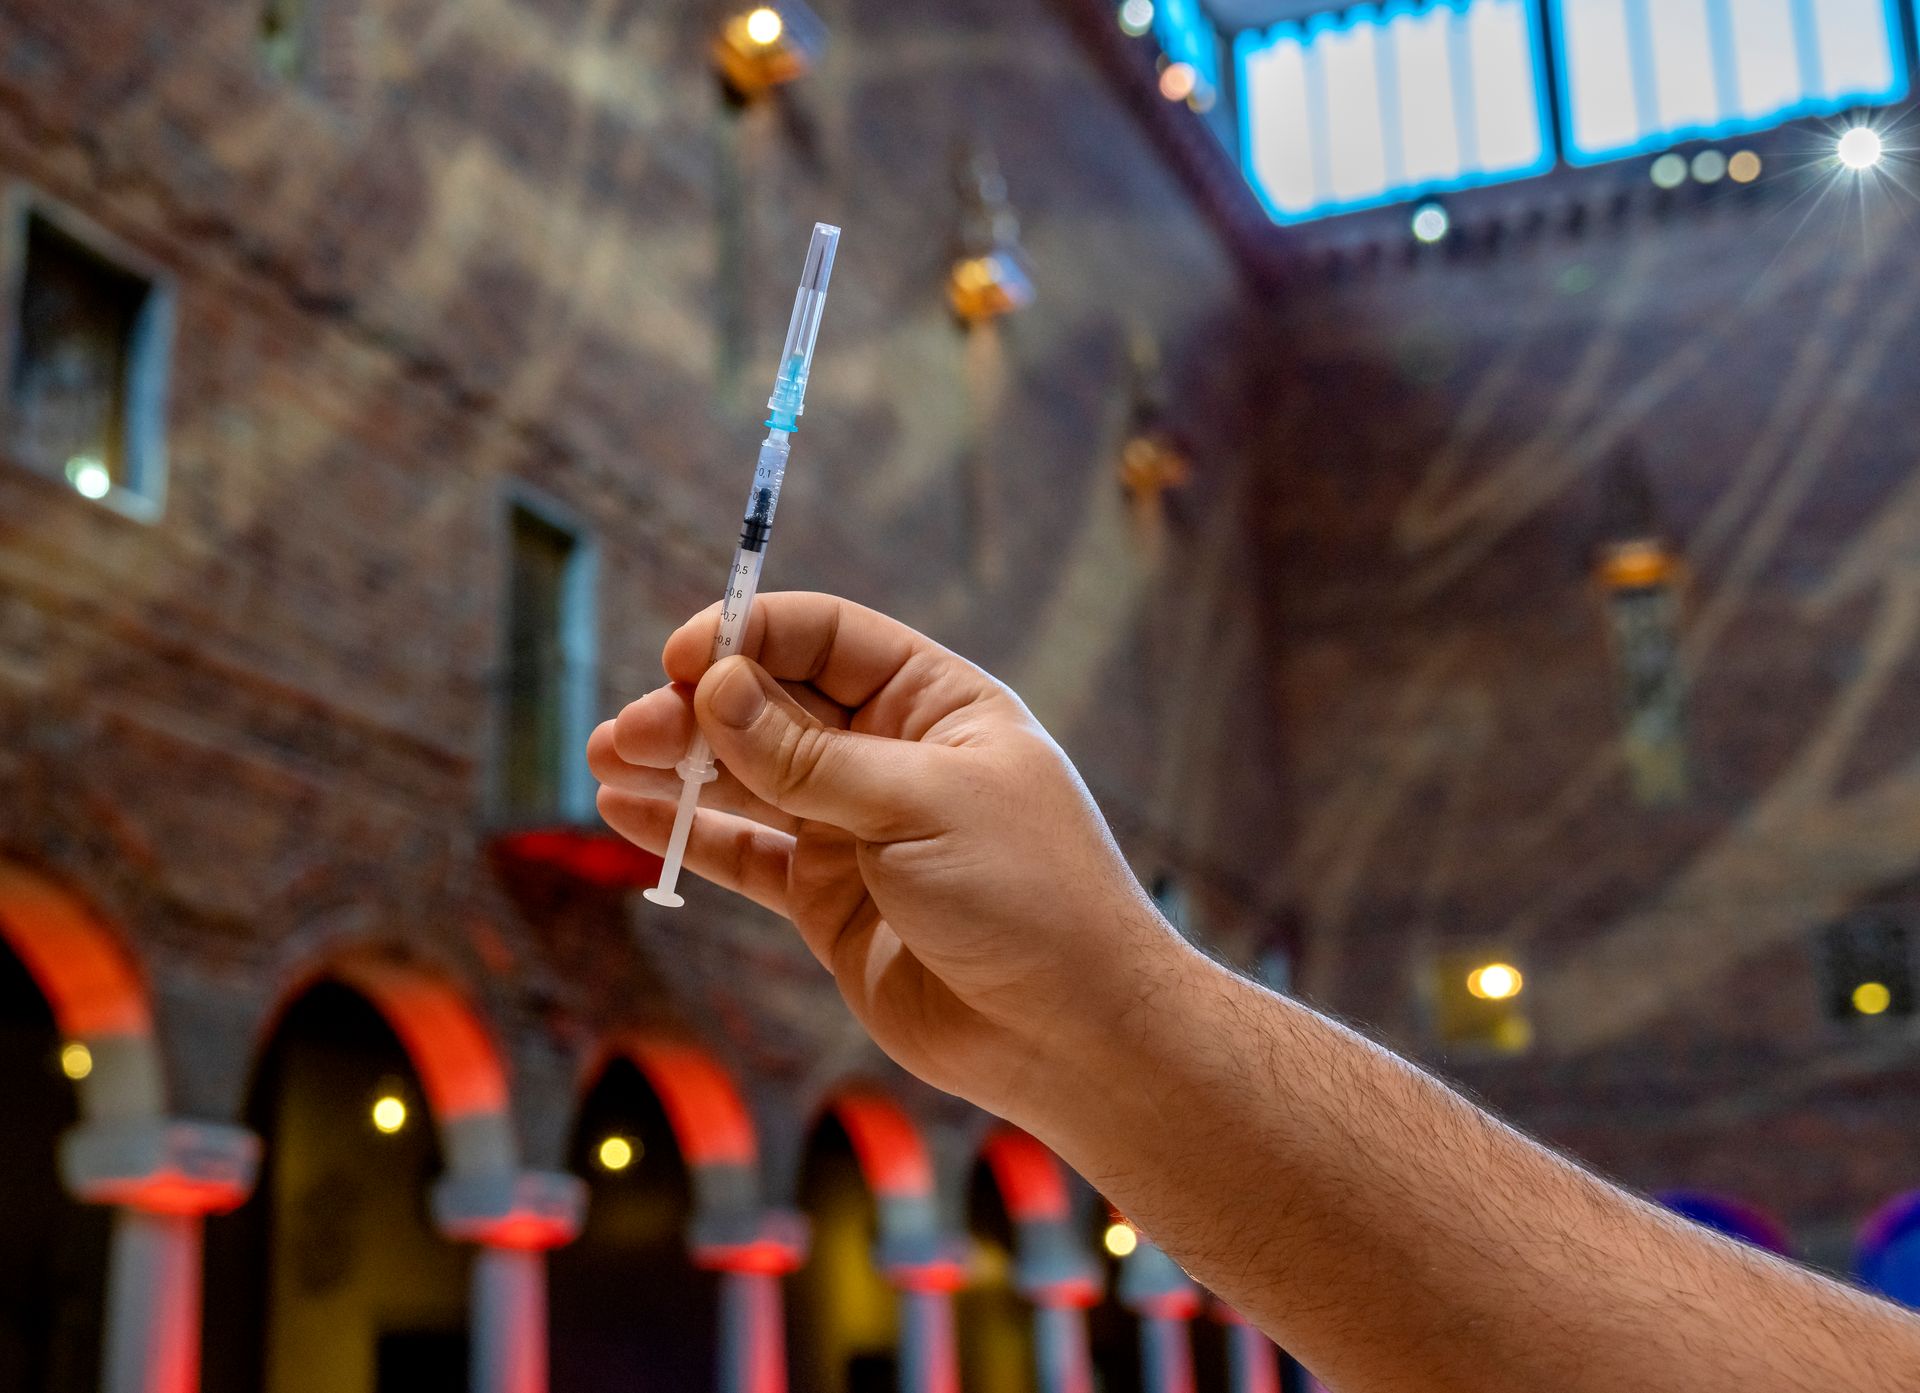 A hand holding a syringe.